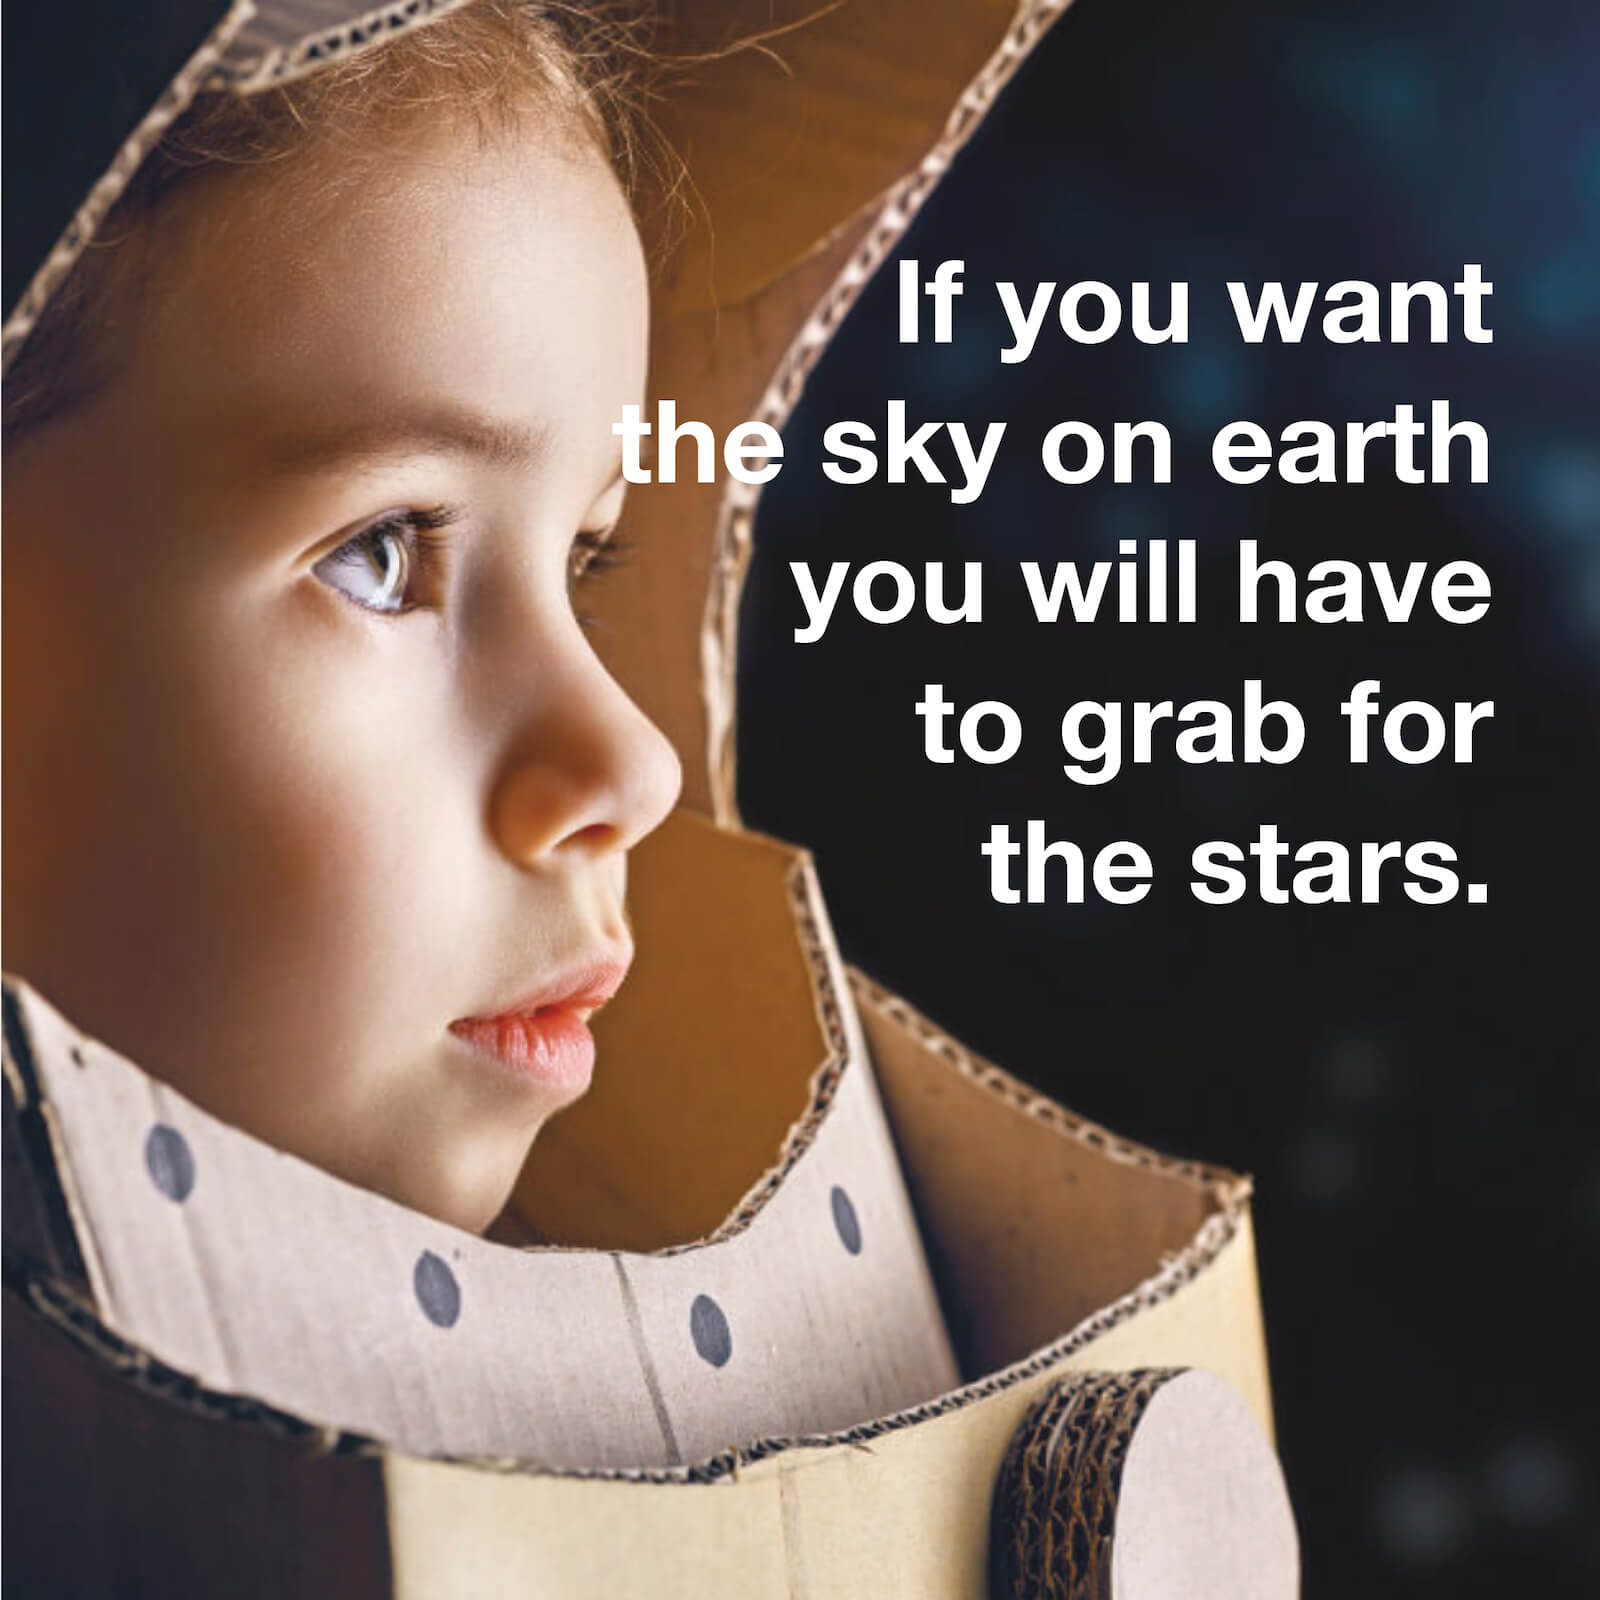 Get the stars in the sky. Grab your luck as a nanny.